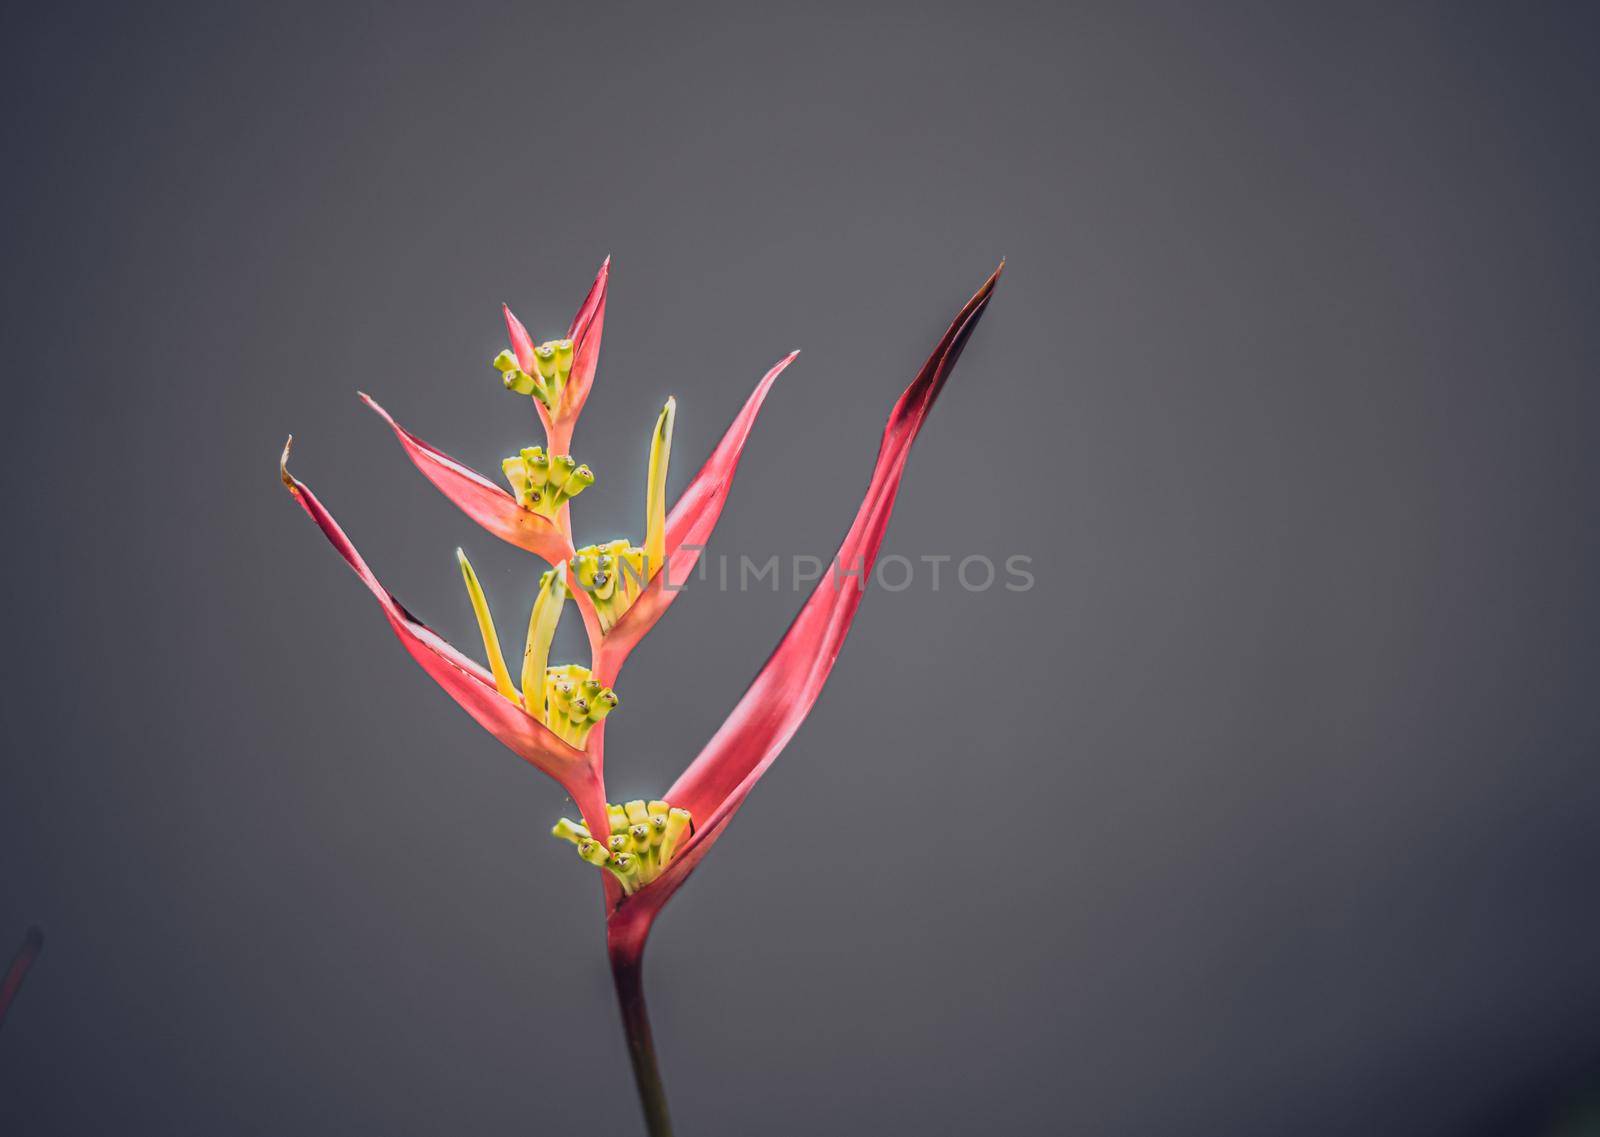 Real beauty nature. Strelitzia, bird of paradise, crane lily plant. Red pink blossom tropical exotic unic flower narrow petal yellow bloom. Light gray background. Copy space. Botanic floral design by nandrey85